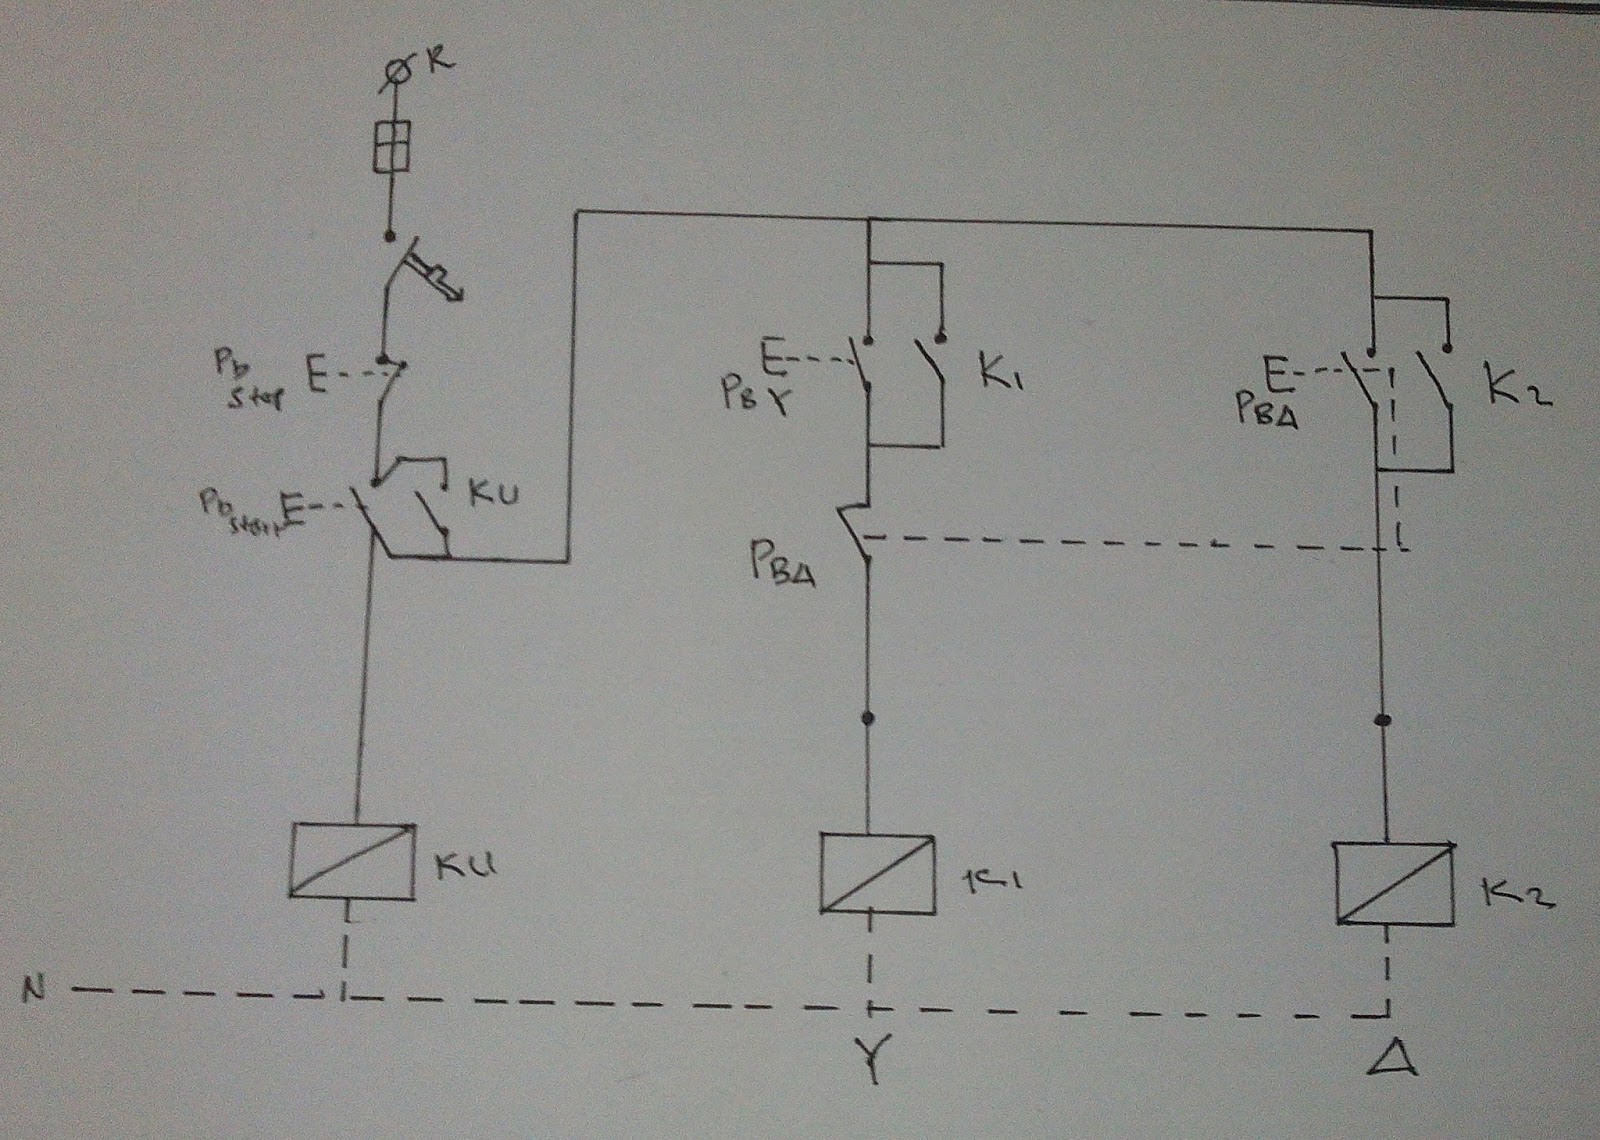 WIRING DIAGRAM STAR-DELTA CONNECTION IN 3-PHASE INDUCTION